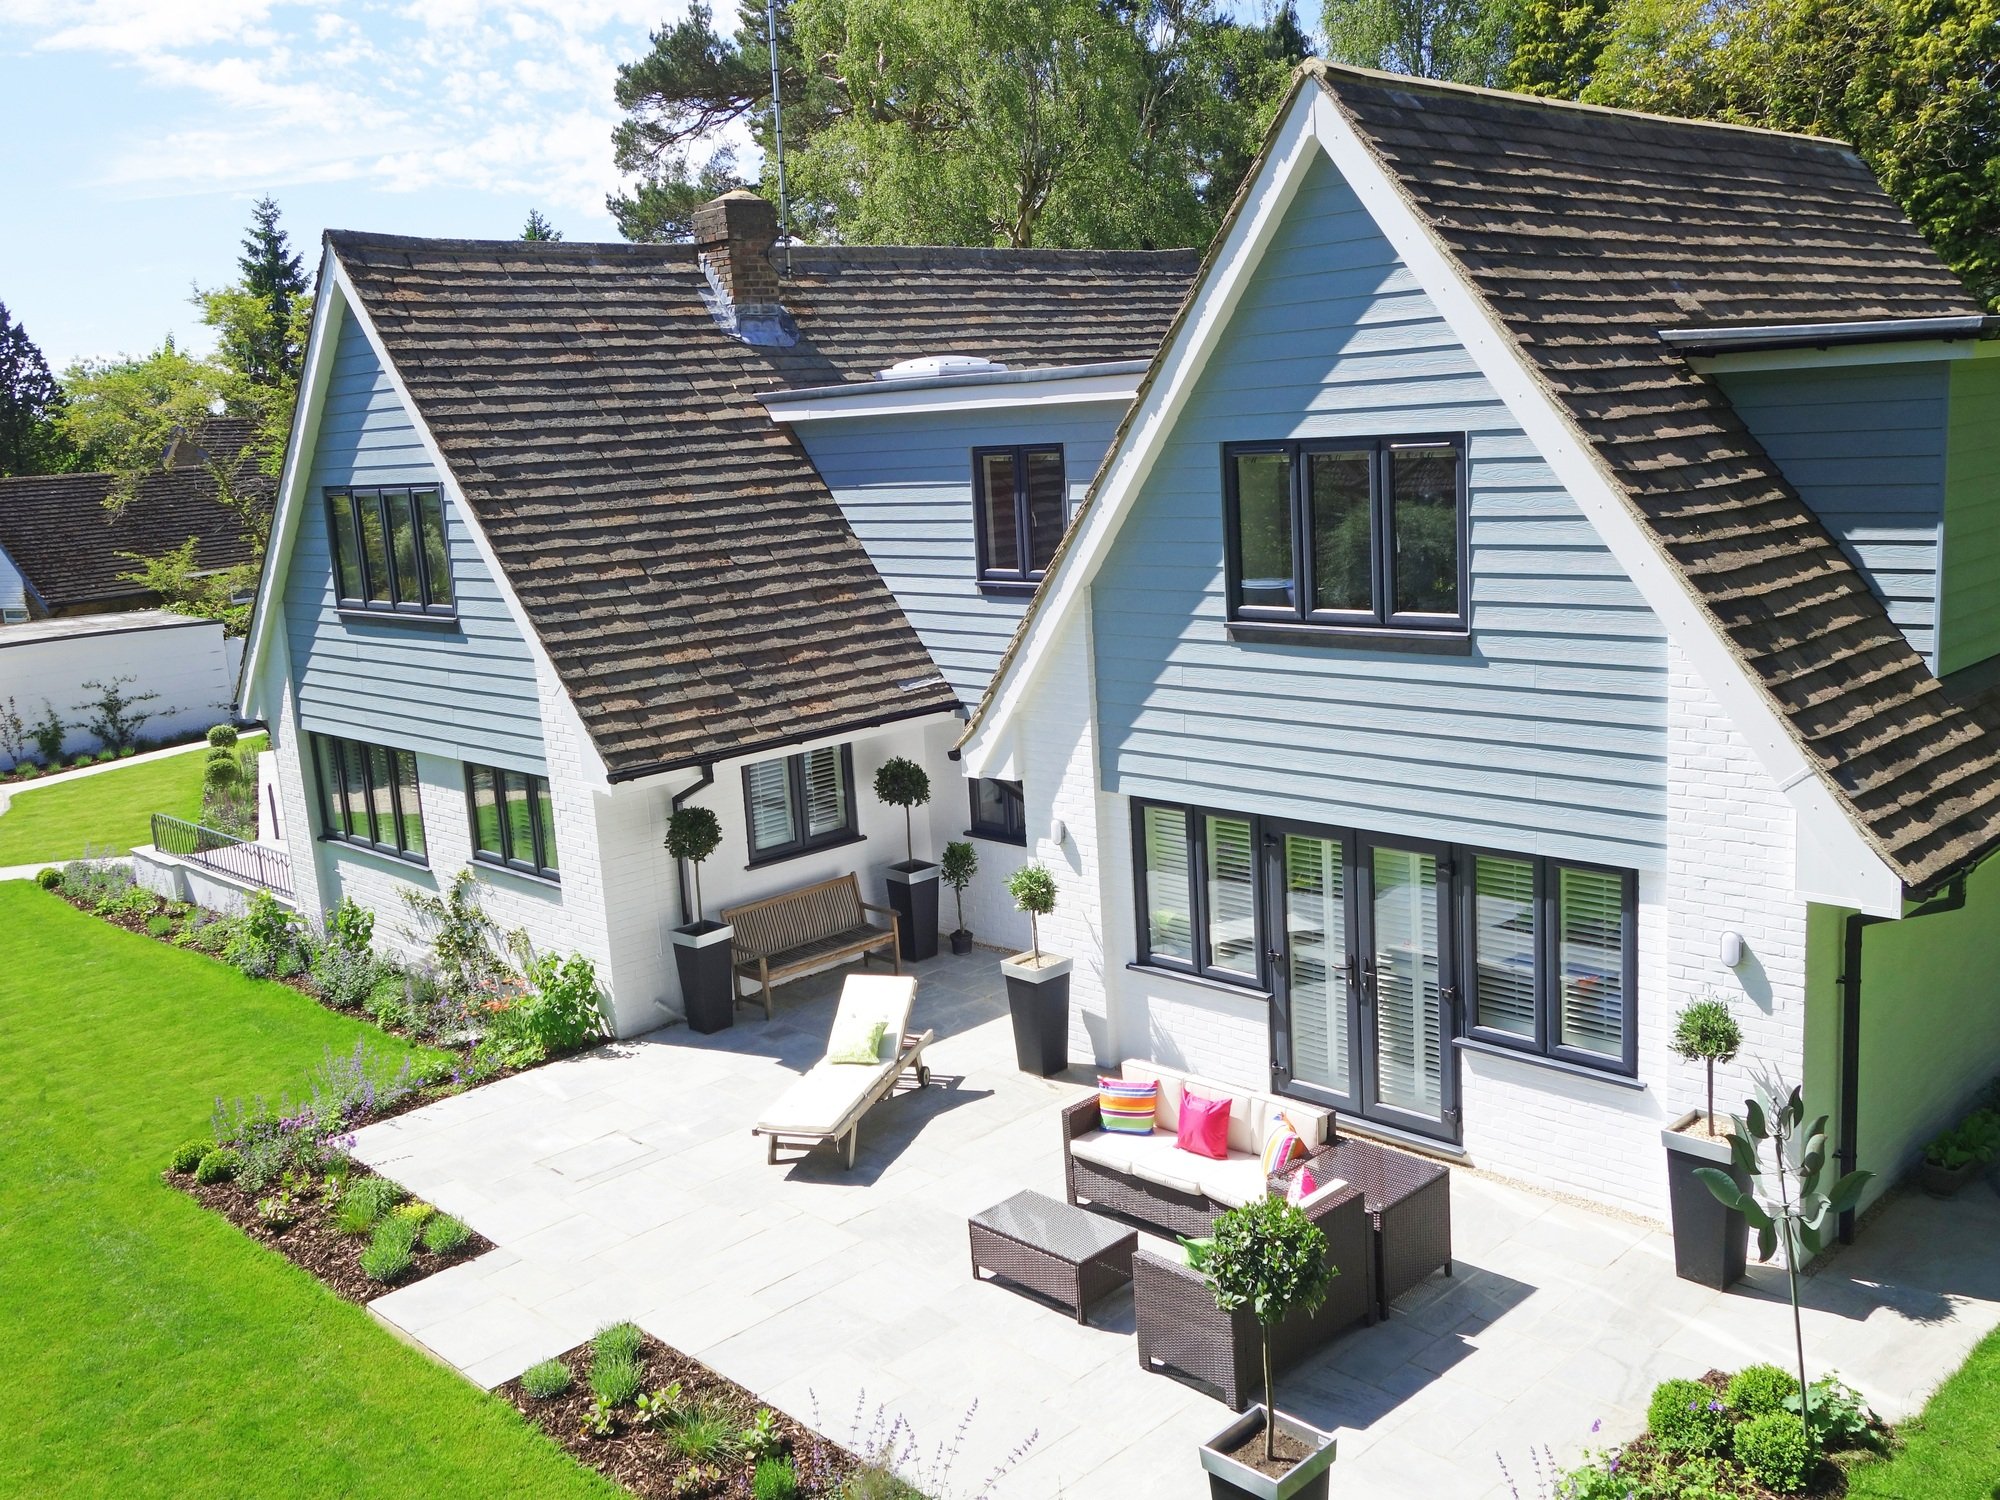 If you're looking to refresh the exterior of your home, click here to explore 2023's best exterior paint colors that will compliment your home.